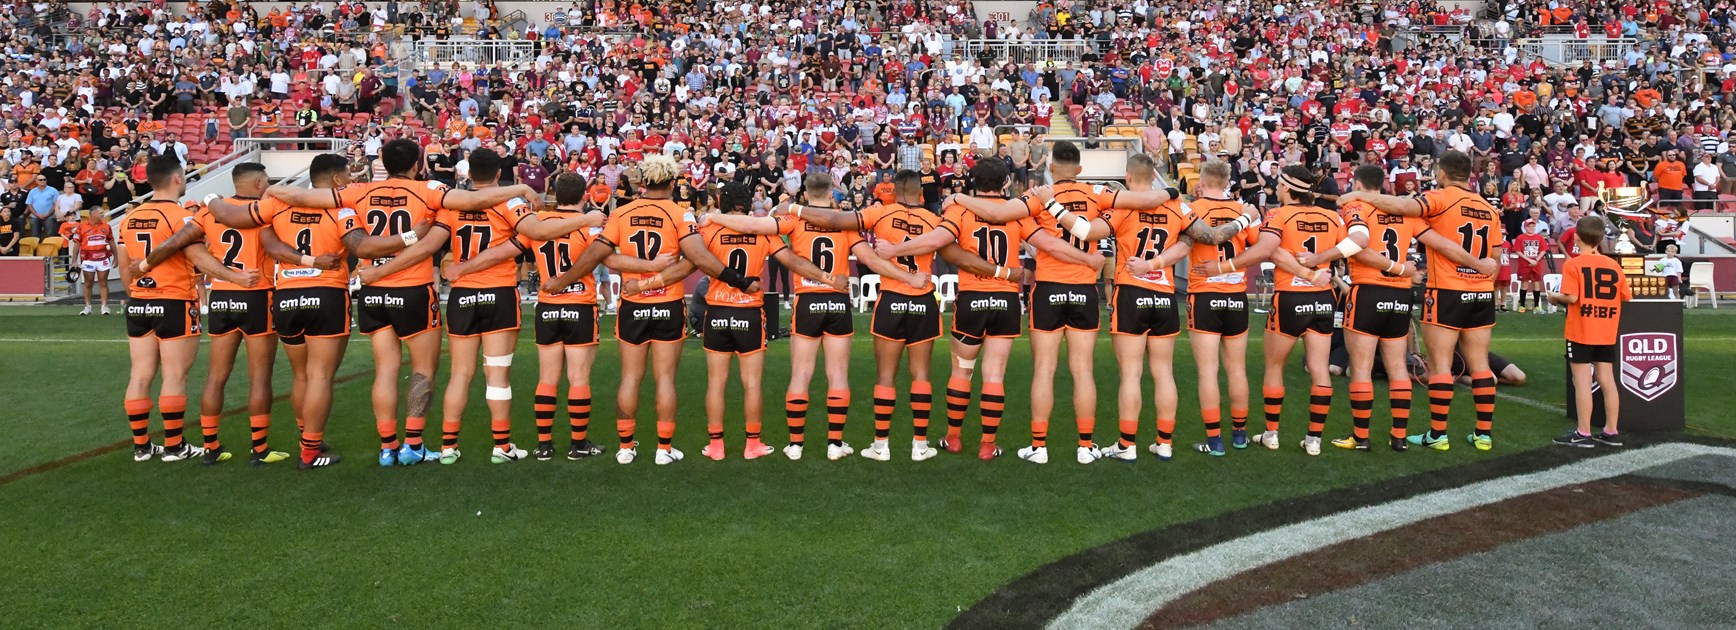 Gains and Losses for 2019: Easts Tigers